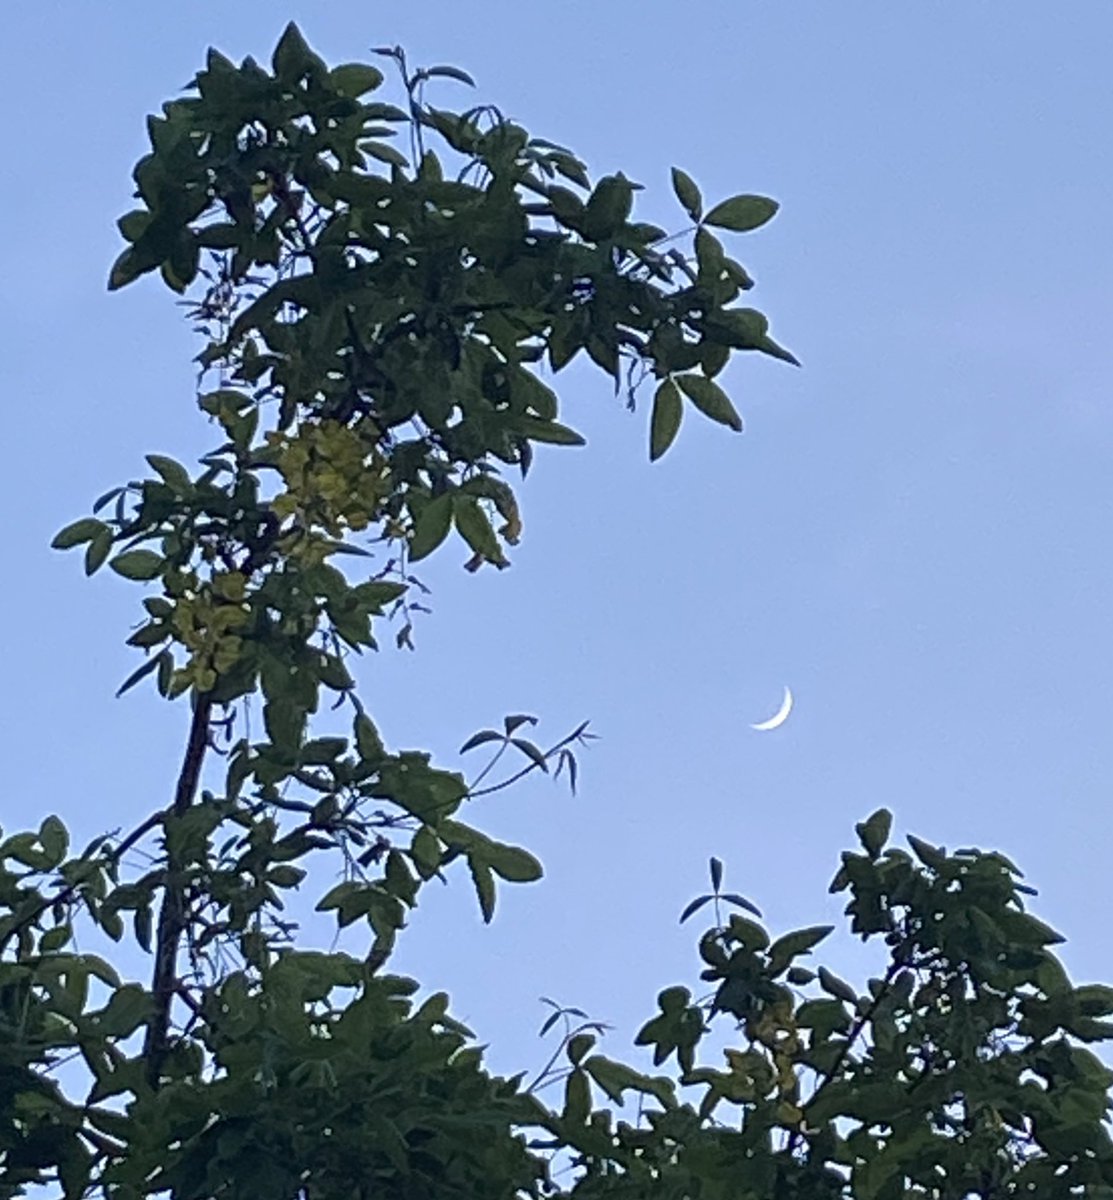 There is always something good in each day but on some days we just have to look a little harder. Seeing the beautiful crescent moon in the garden this evening definitely helped to end the day with a smile. Keep looking up & stay close to the things that make you smile too!🤍🫶🏽🌙